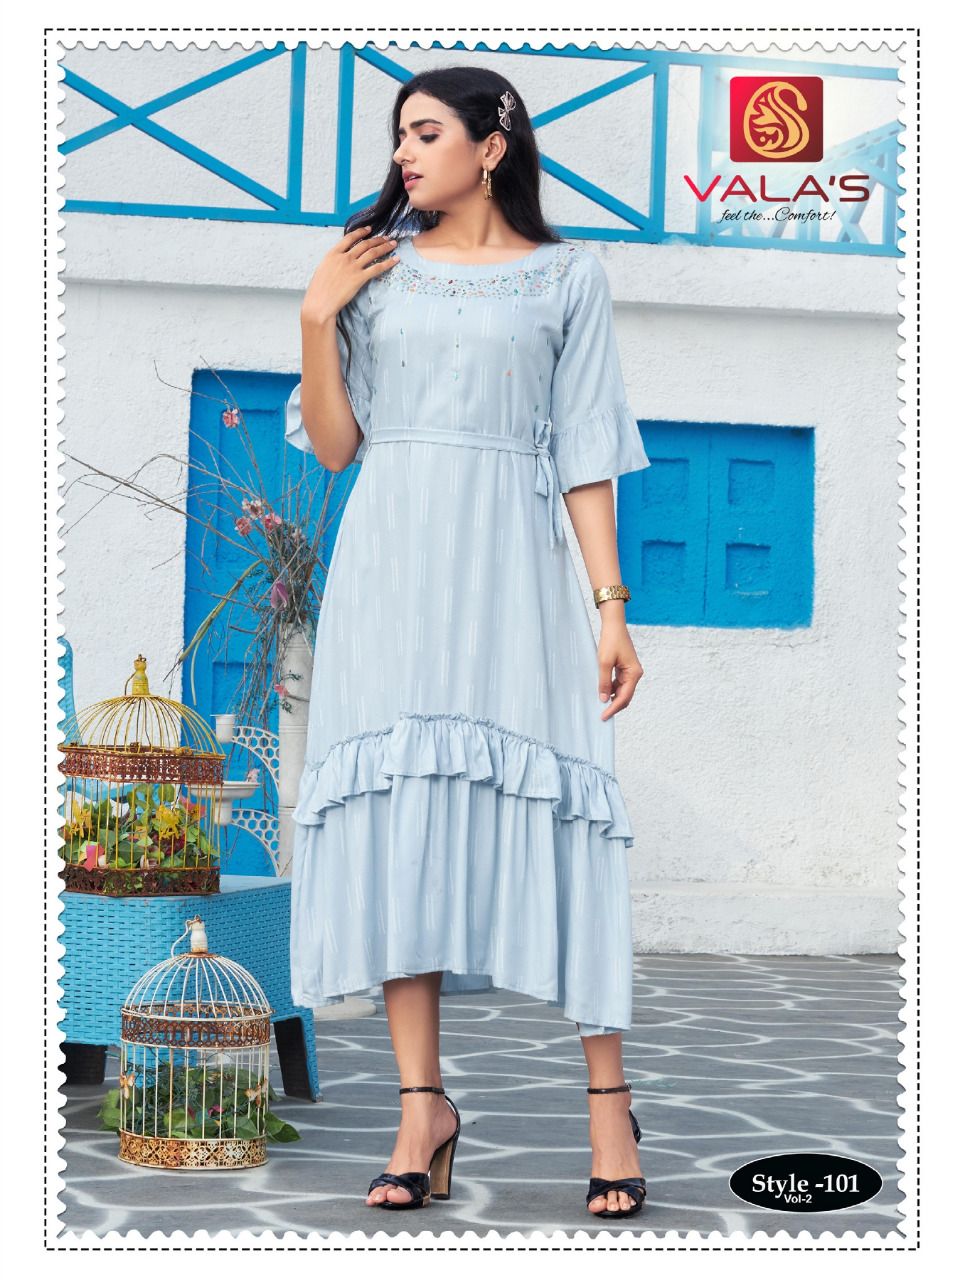 Valas Style Vol 2 collection 9